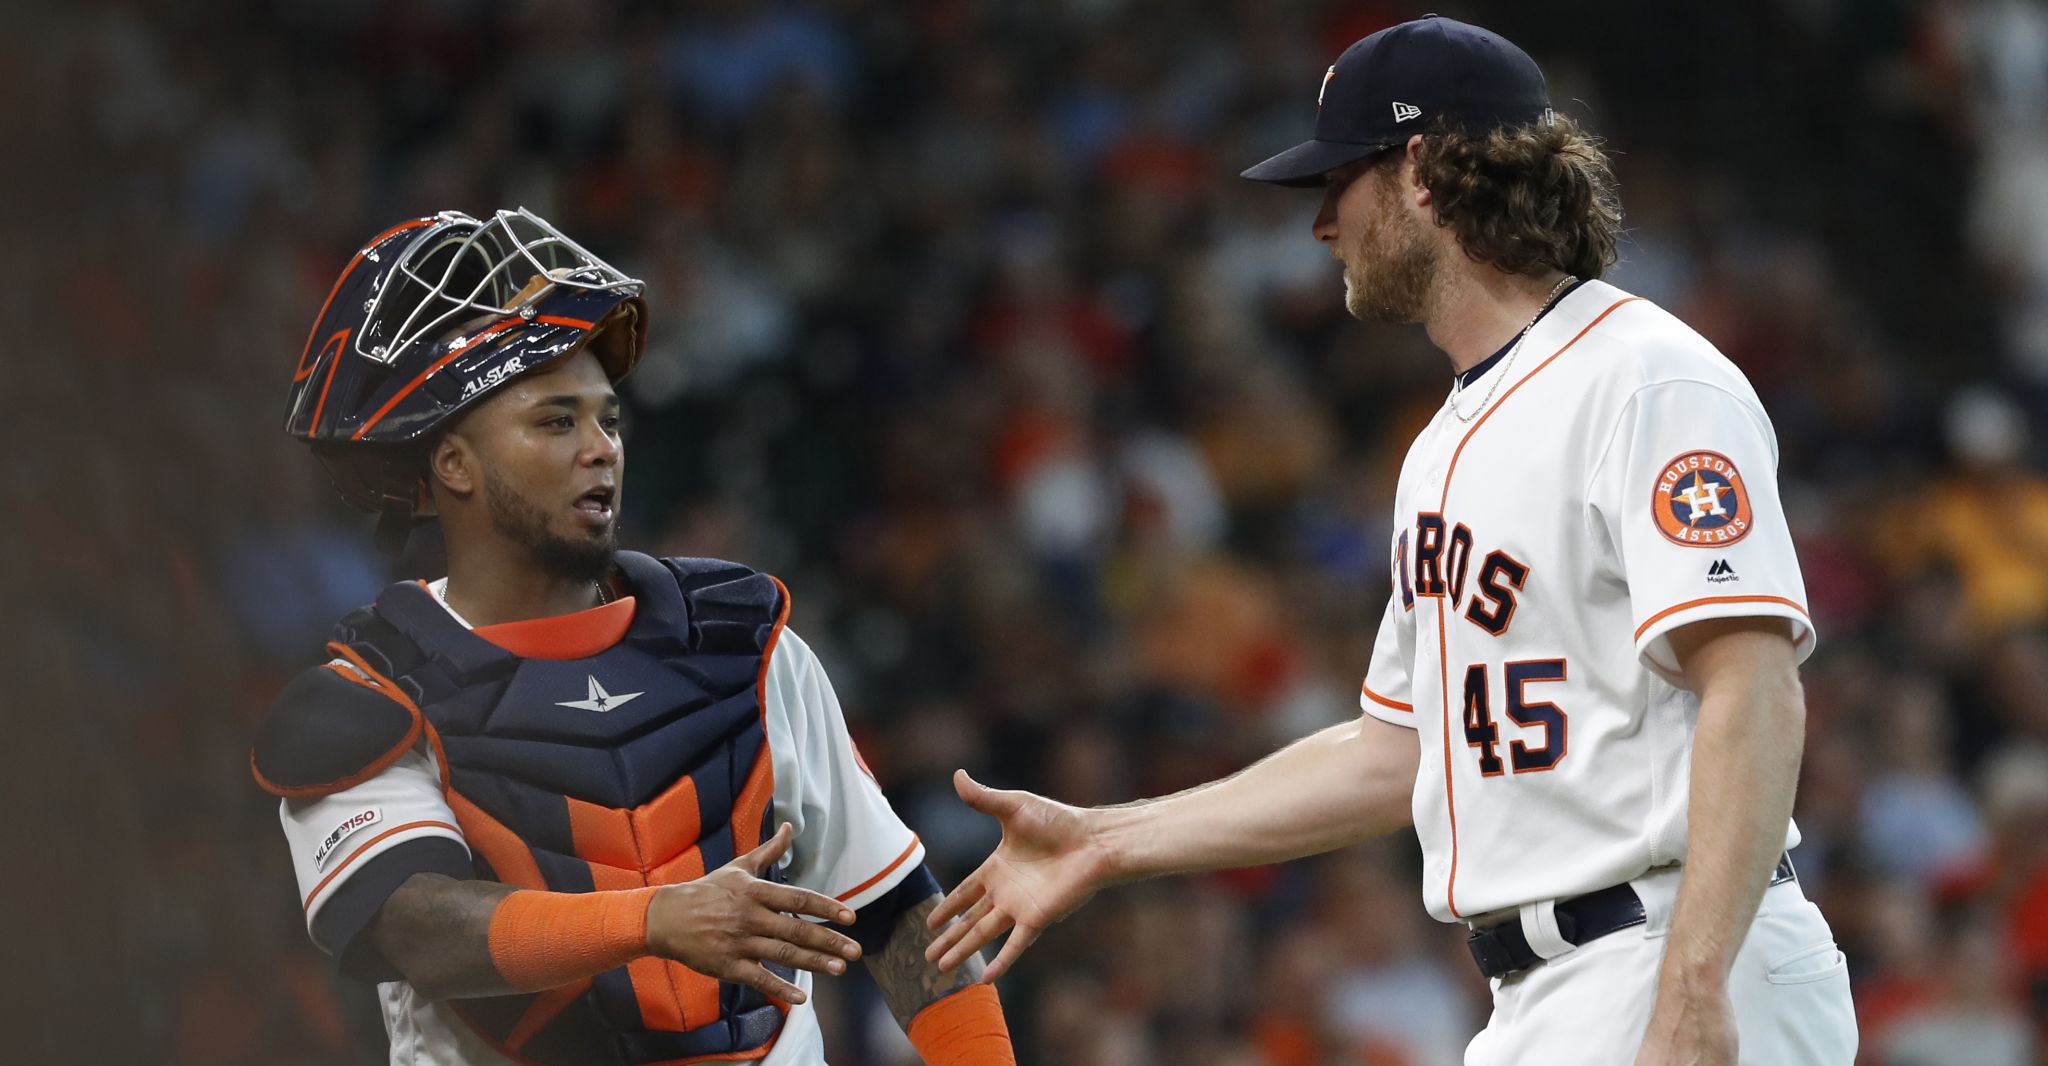 Gerrit Cole shuts out Astros in Houston return